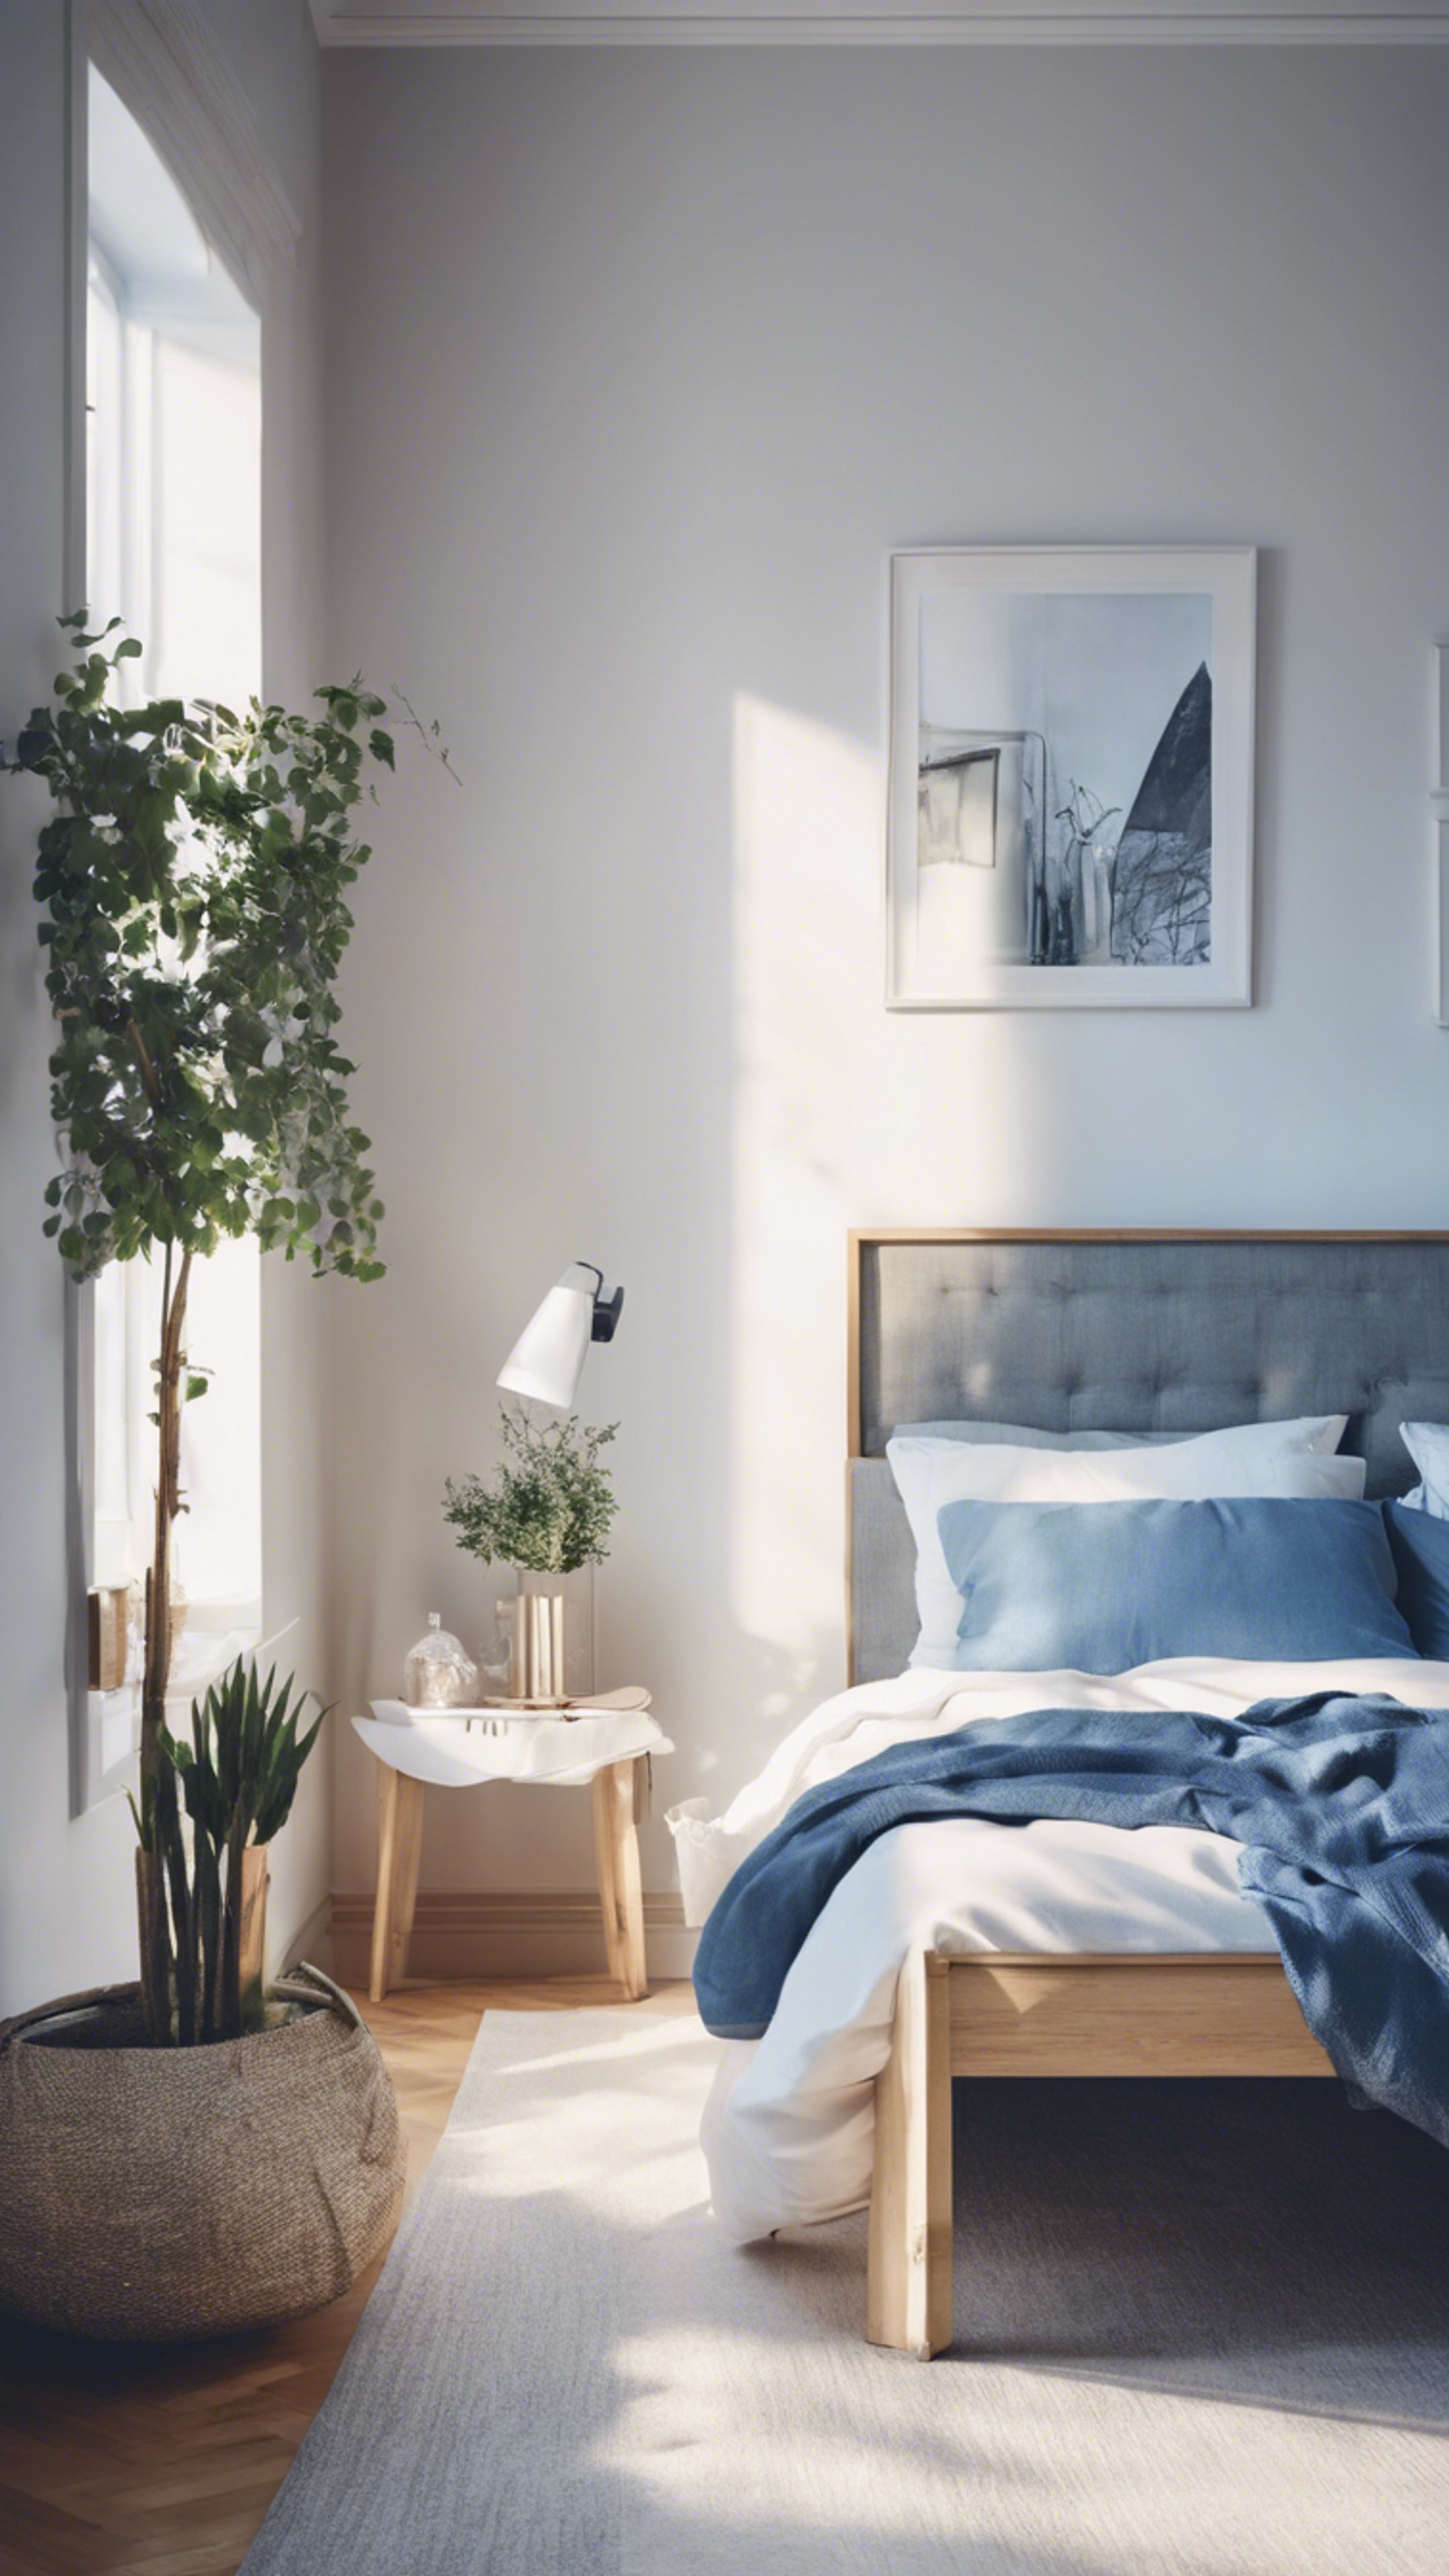 A Scandinavian style bedroom with white and blue minimalist decor bathed in morning sunlight. Tapeet[5ddcfeaf0e5340e39bc5]